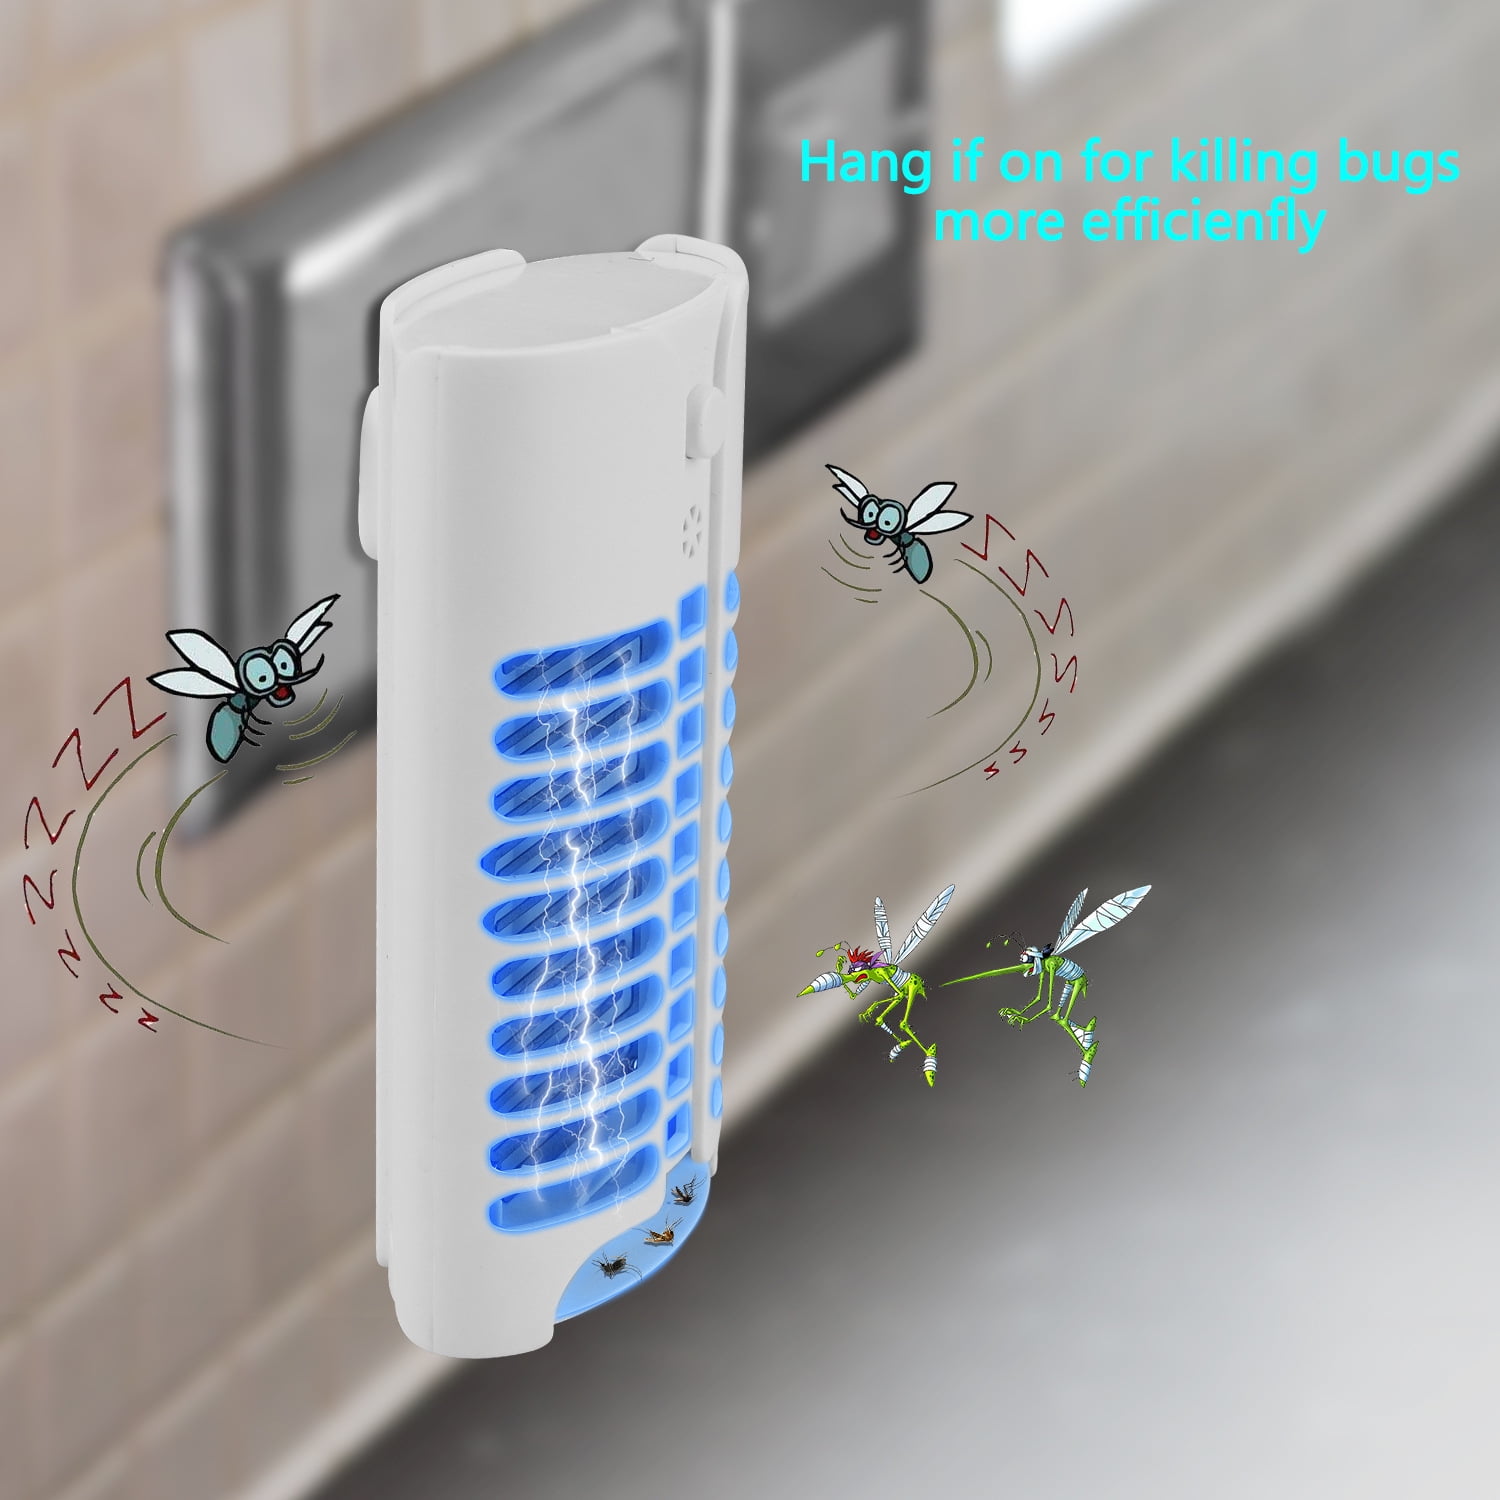 NERH Bug Zapper Electronic Mosquito Killer & Trap Insect Killer Lamp Indoor Plug in Mosquito Zapper Portable Home Electric Insect Trap Eliminates Most Flying Pests 